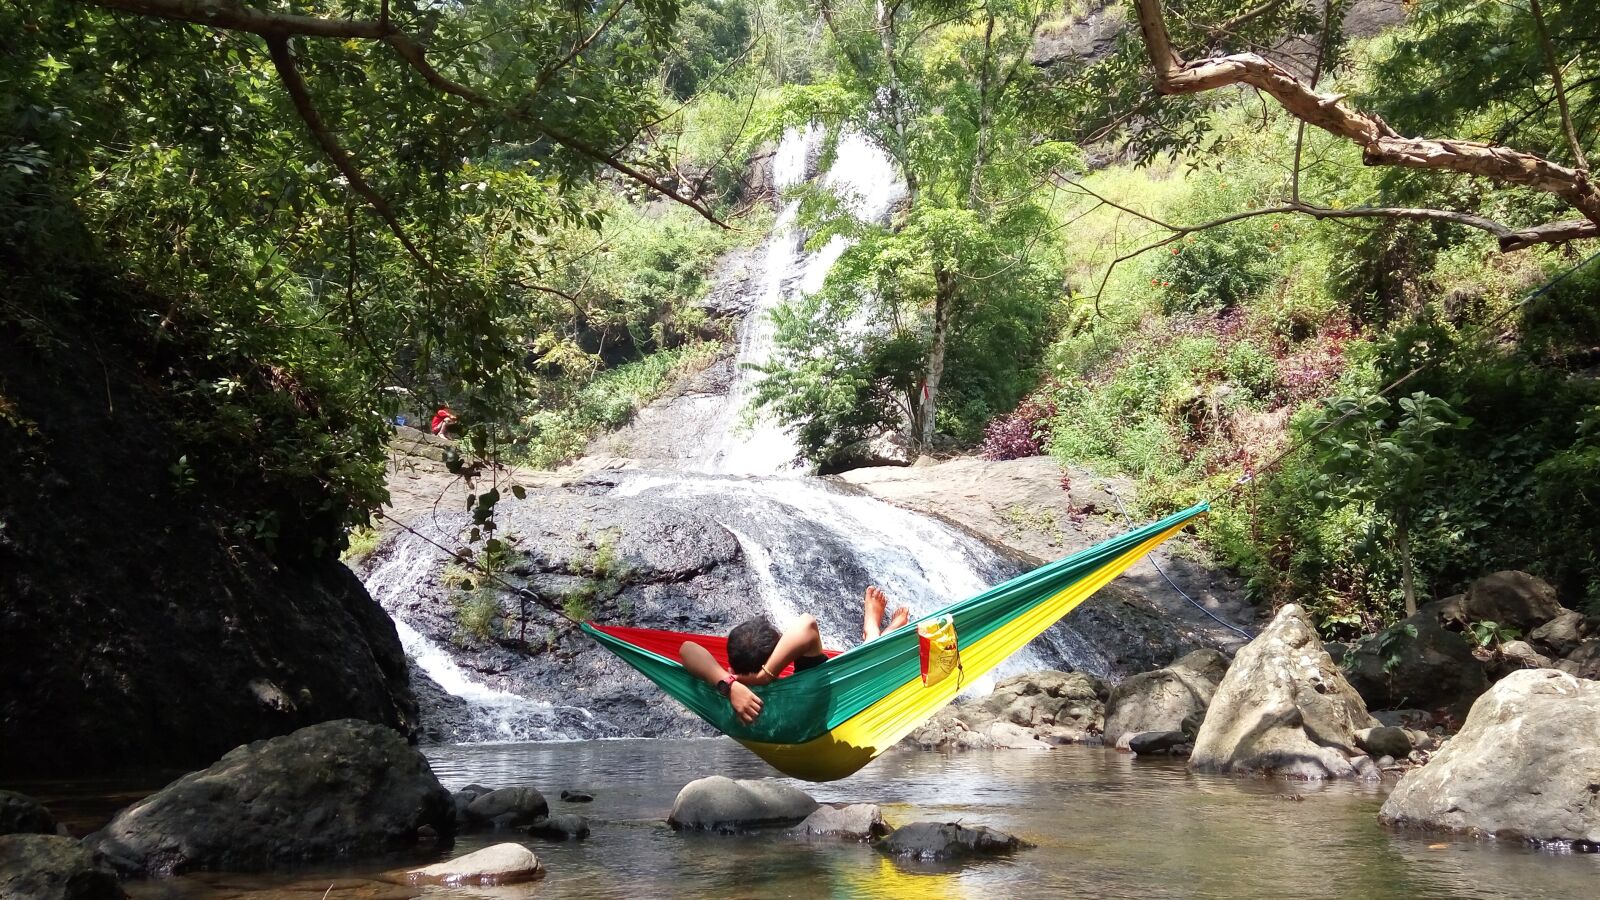 Xiaomi HM Note 2 sample photo. Hammock, river, forest photography